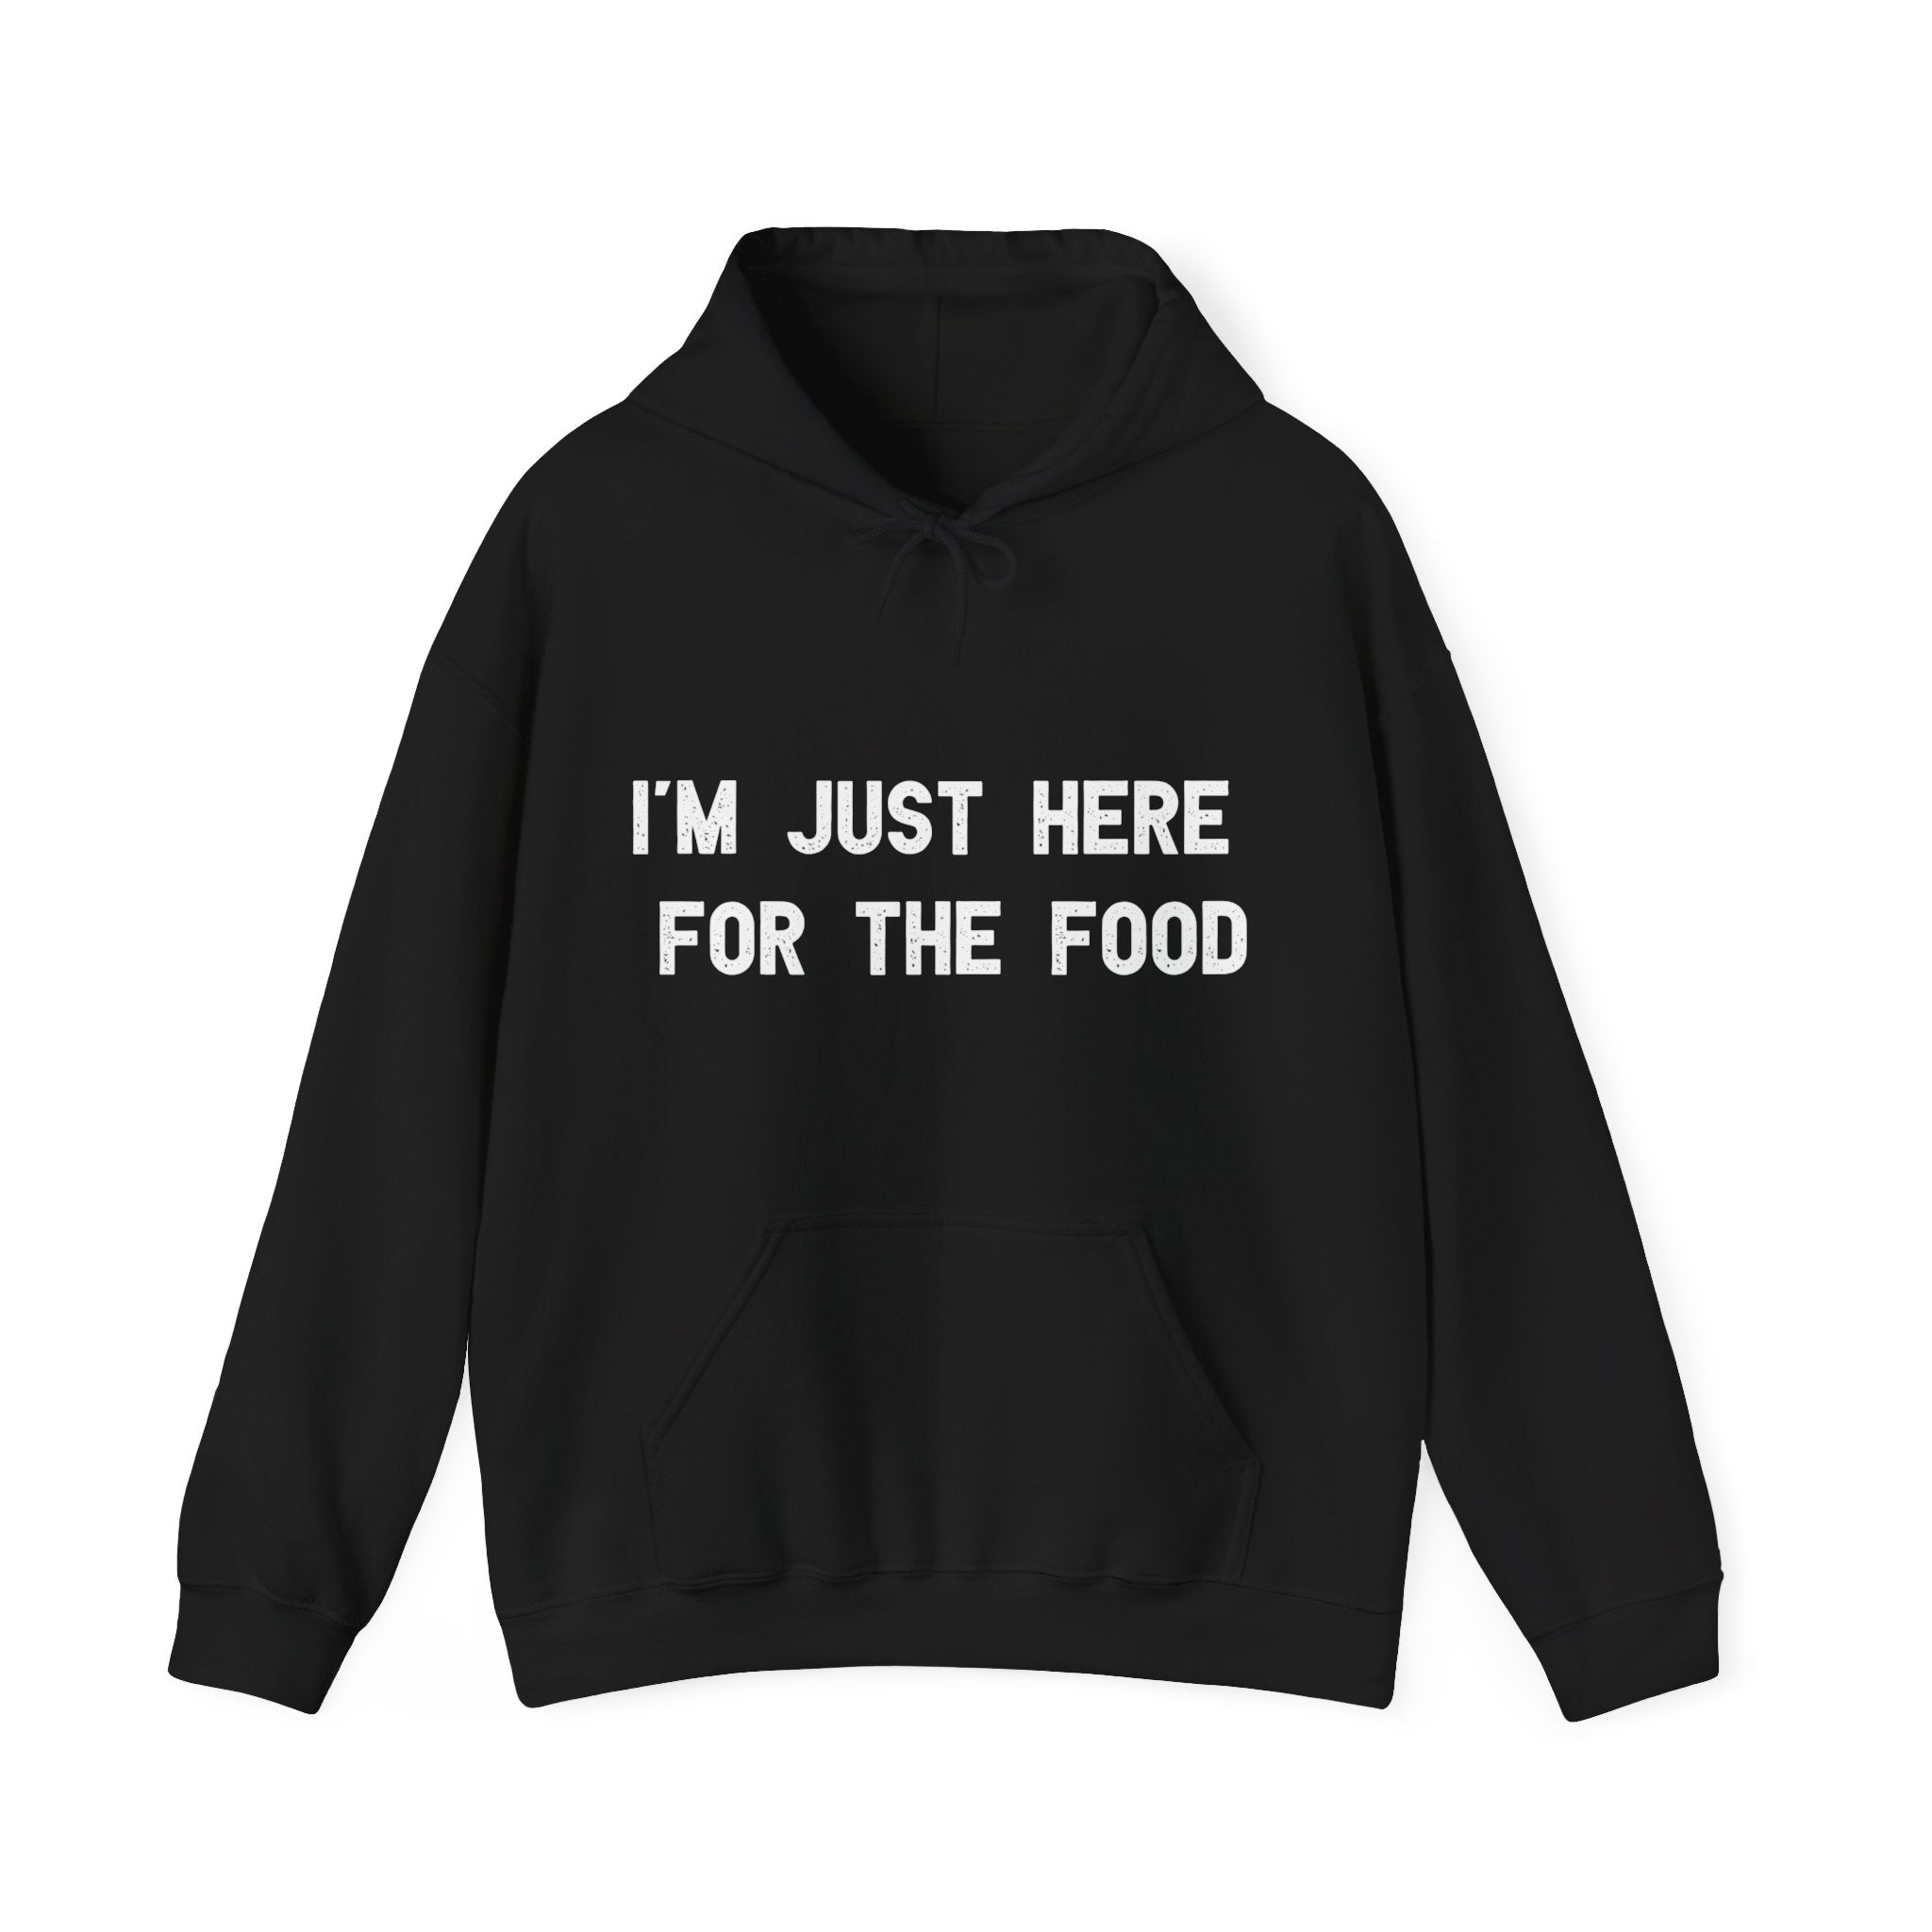 I'm Just Here For The Food - Hooded Sweatshirt